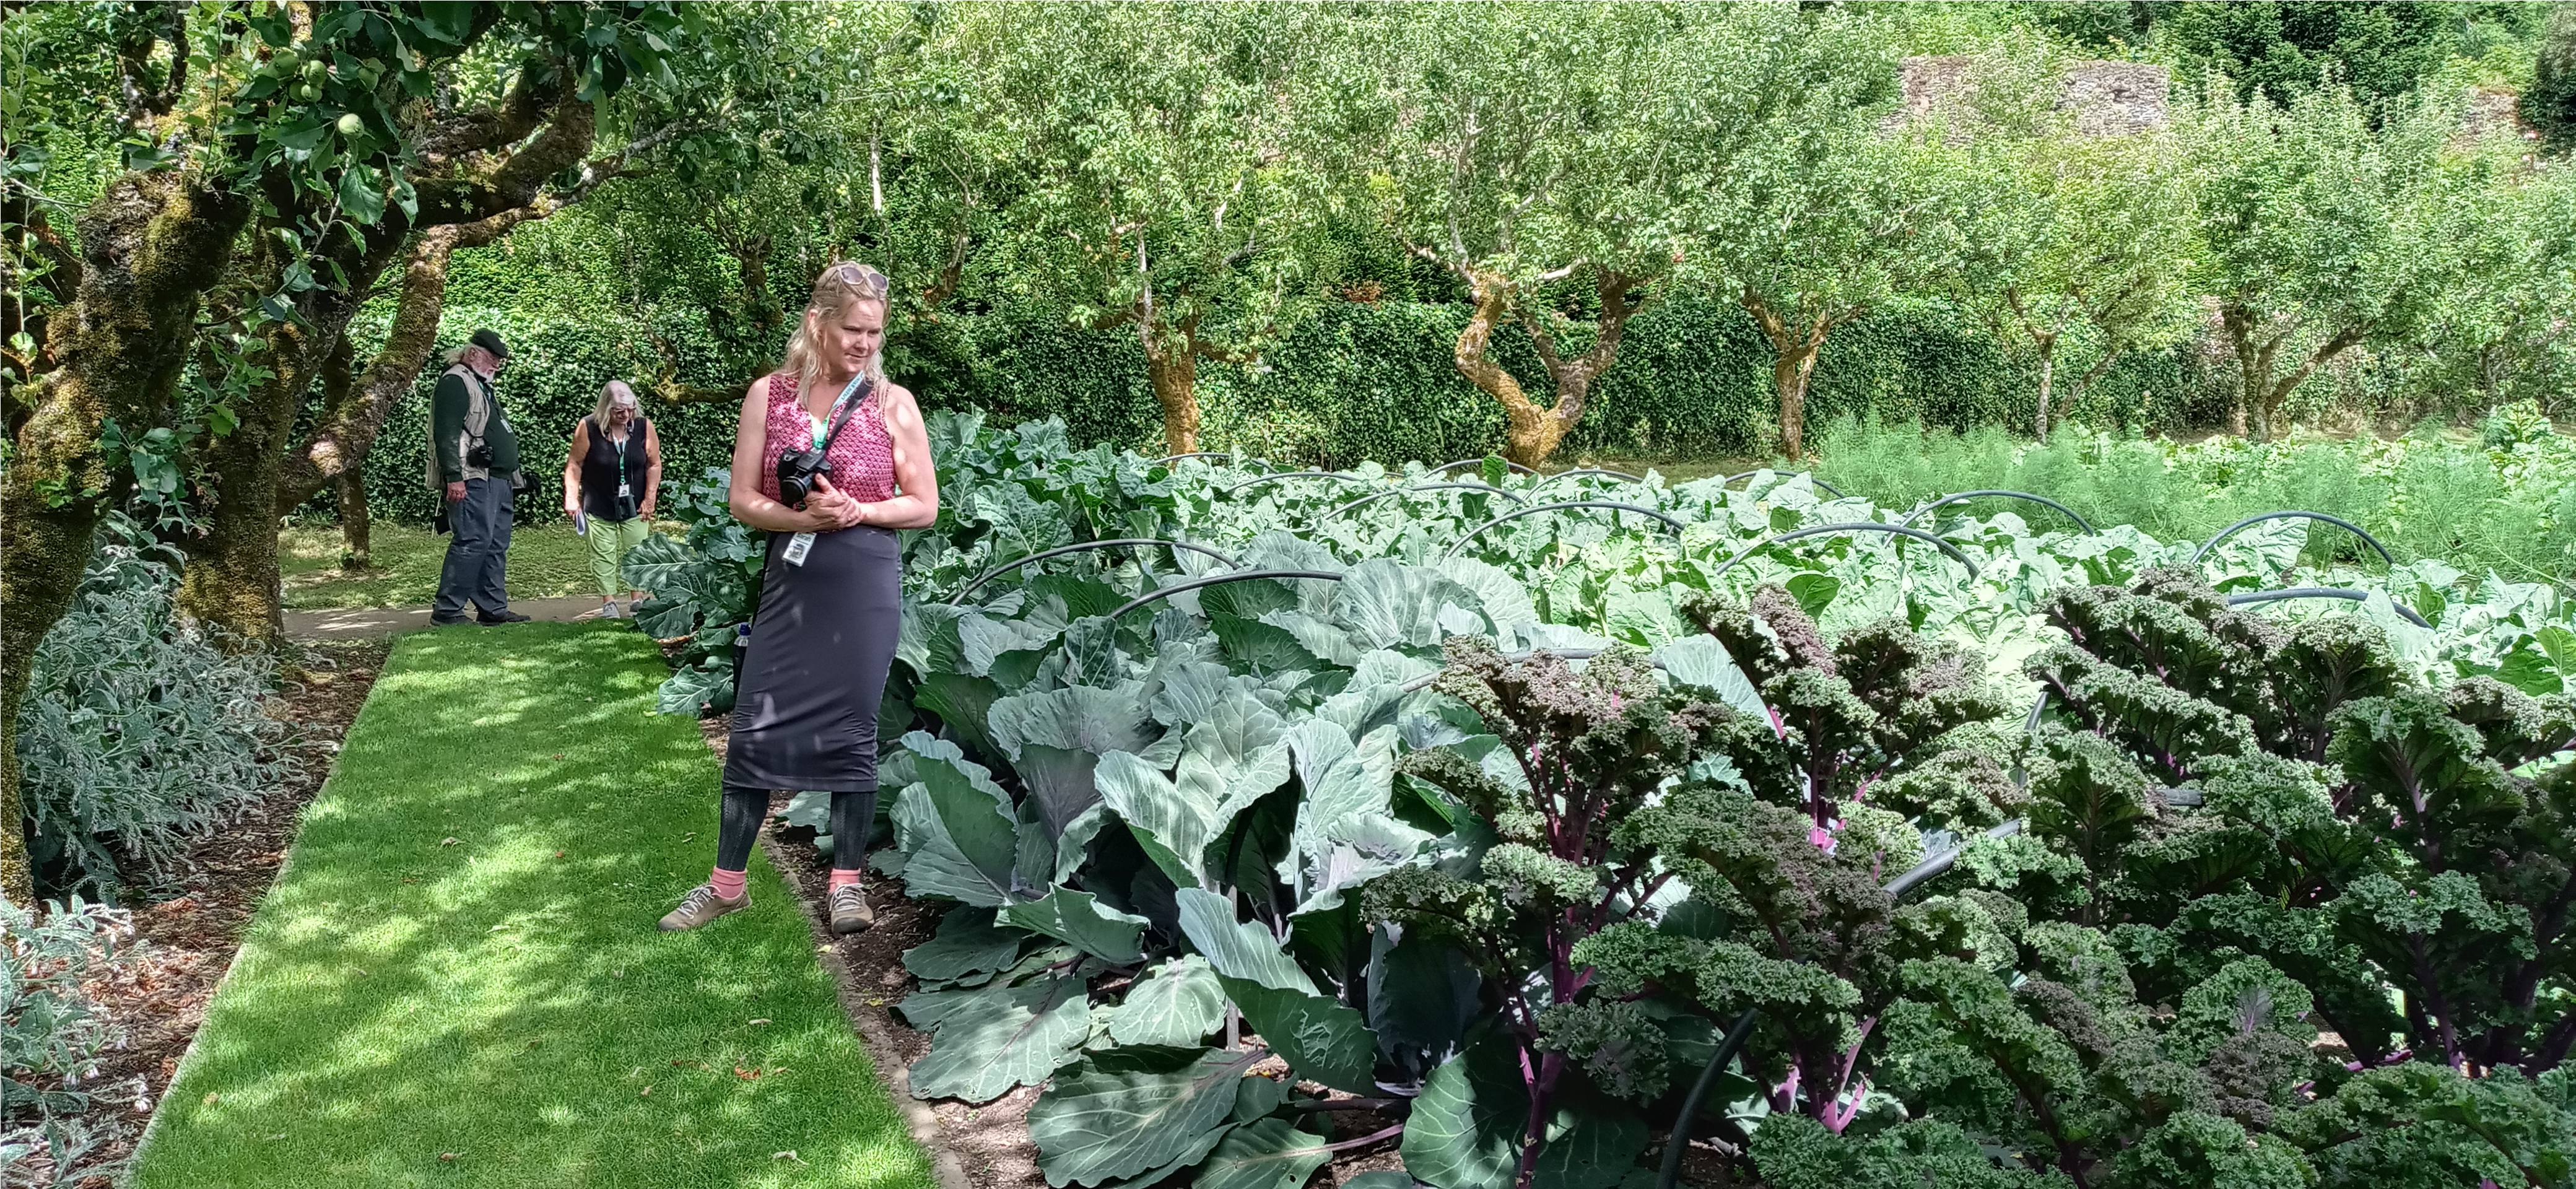 Sarah Rautio standing by a garden of cole crops.